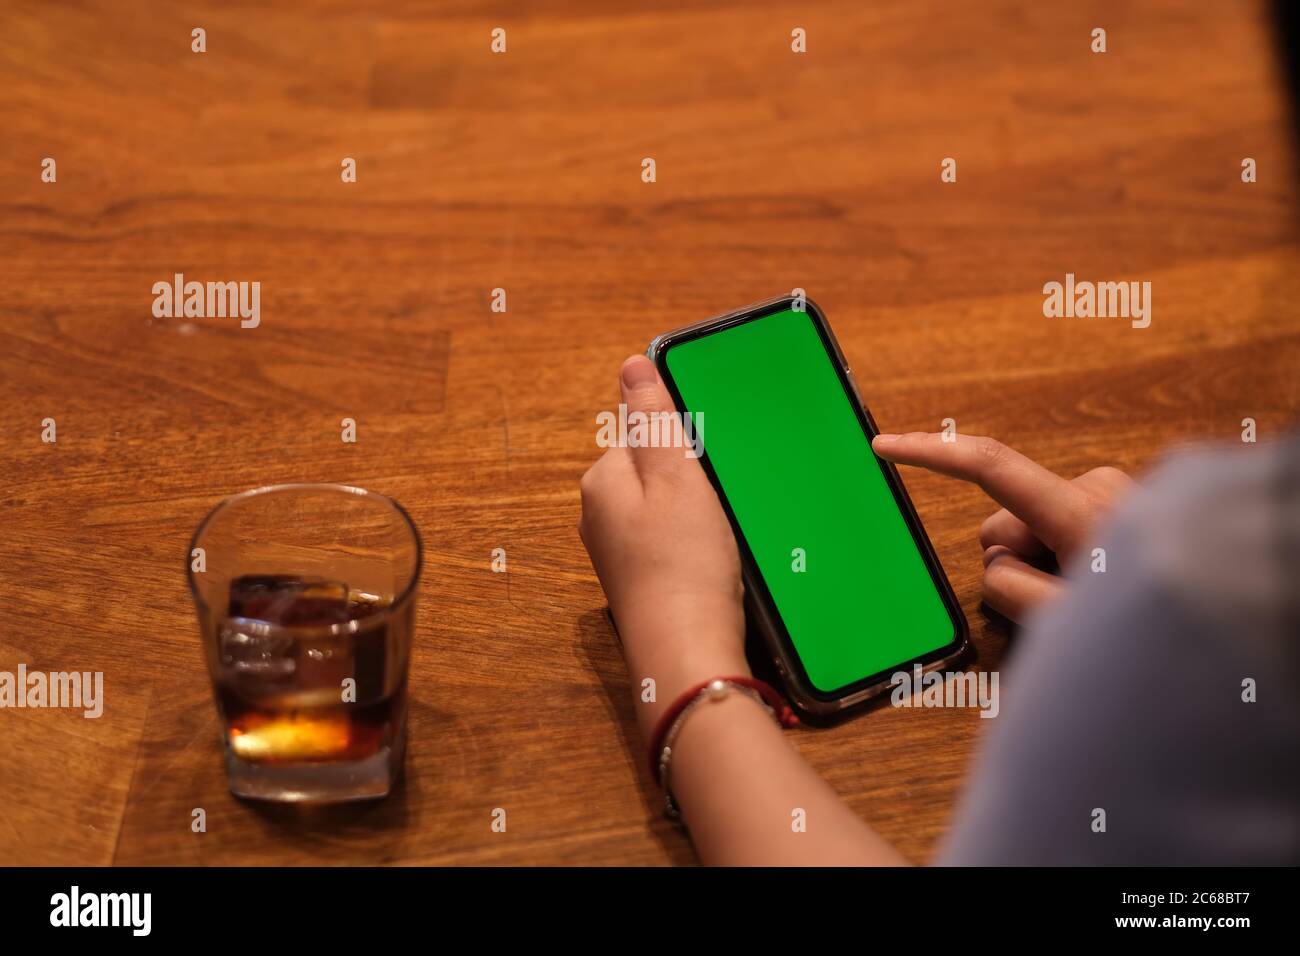 over shoulder of people tapping green screen smart phone. a glass of iced drink on wooden table Stock Photo